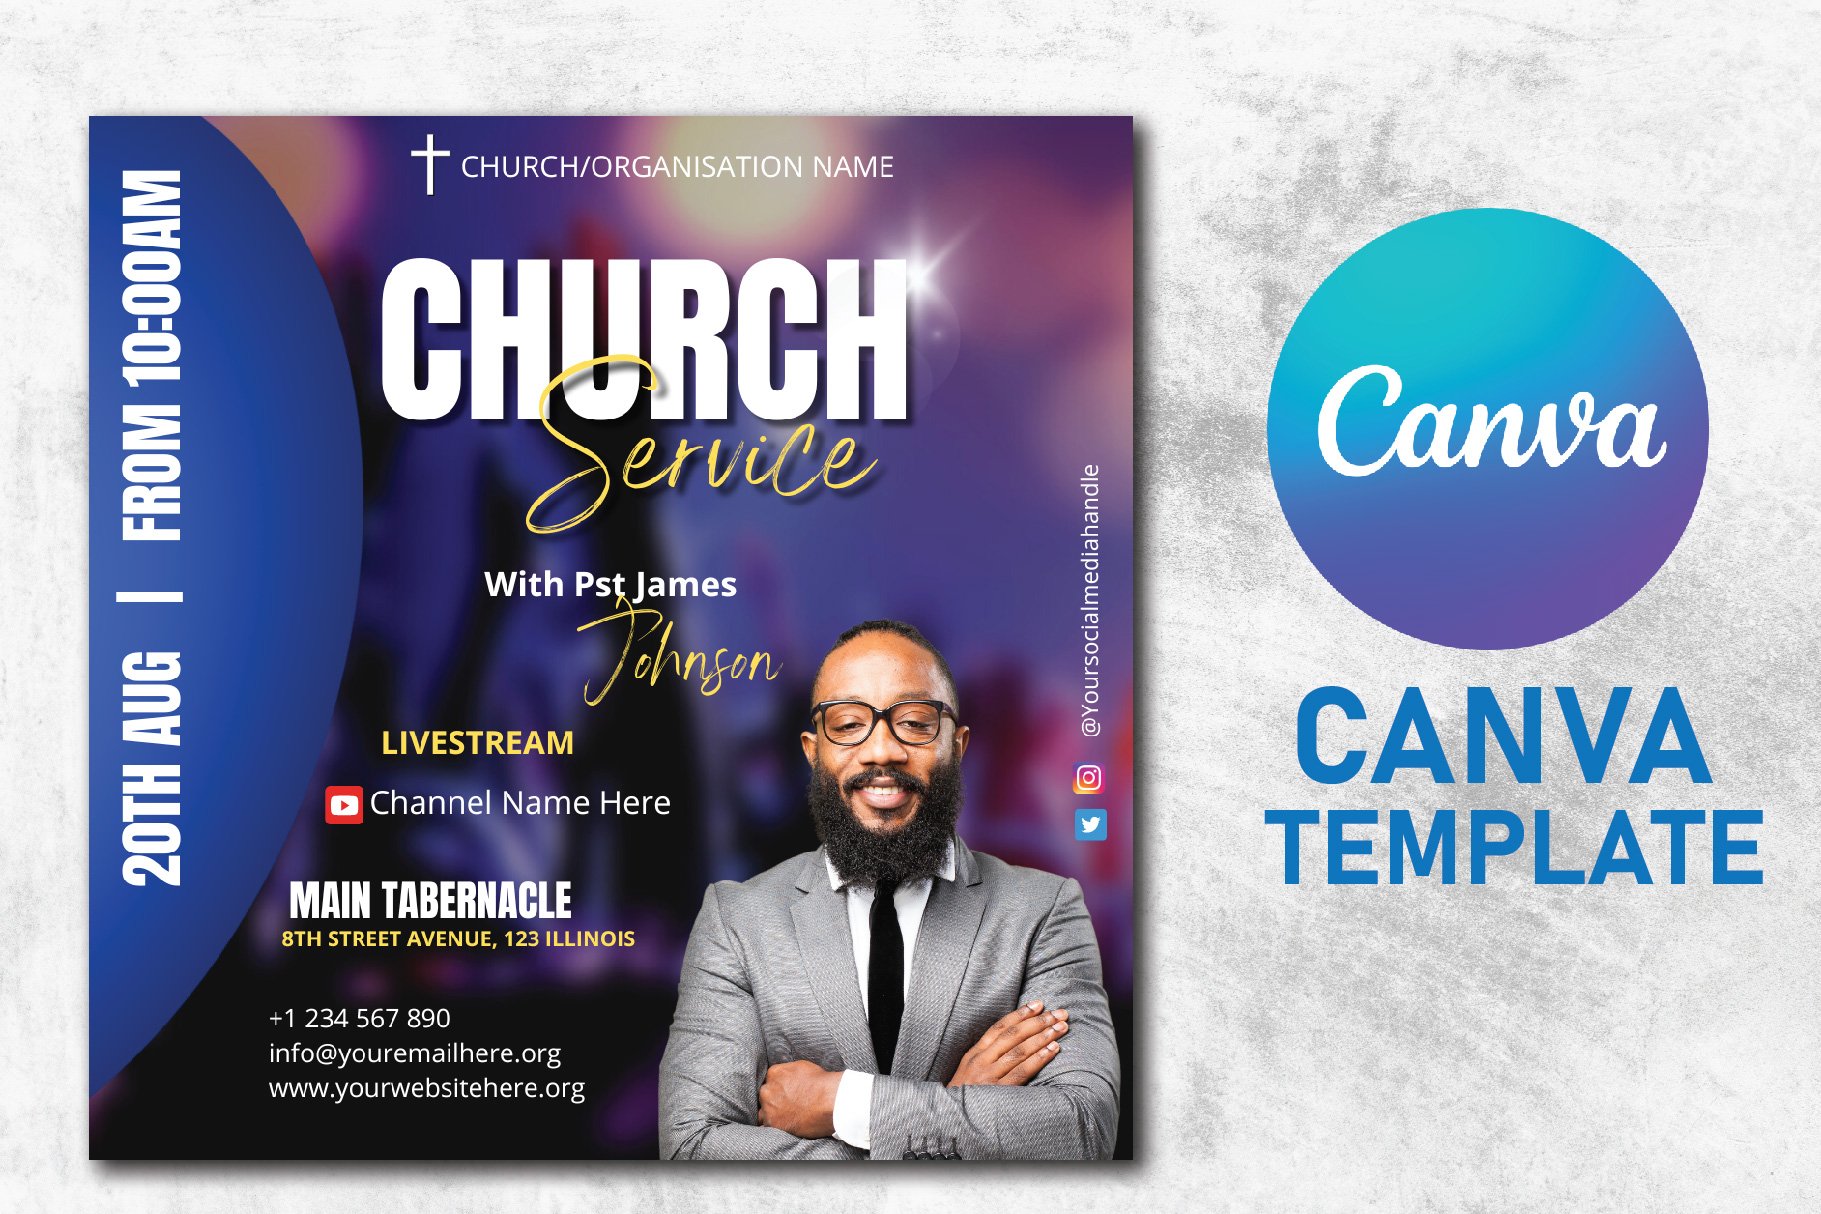 CHURCH FLYER CANVA TEMPLATE cover image.